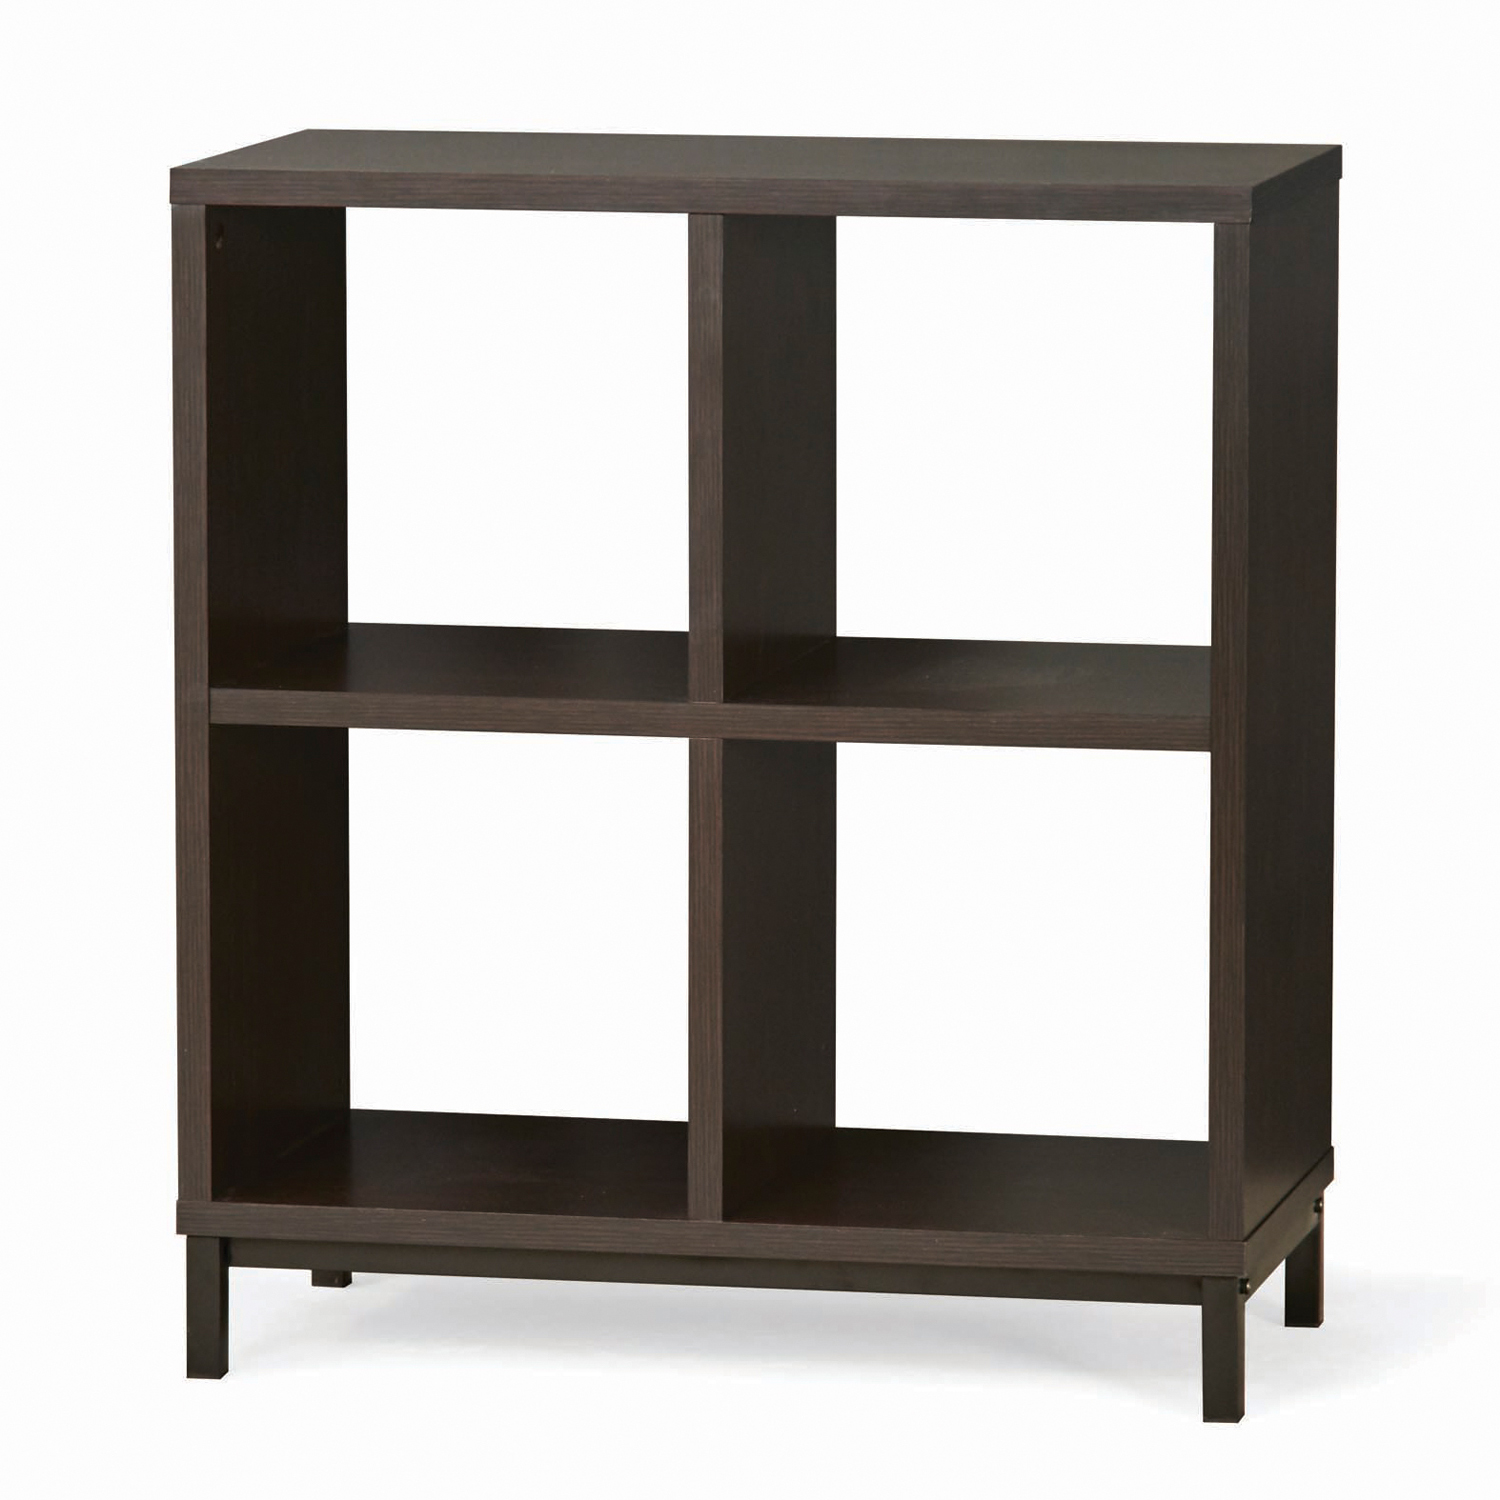 Better Homes & Gardens 4-Cube Organizer with Metal Base, Espresso - image 1 of 6